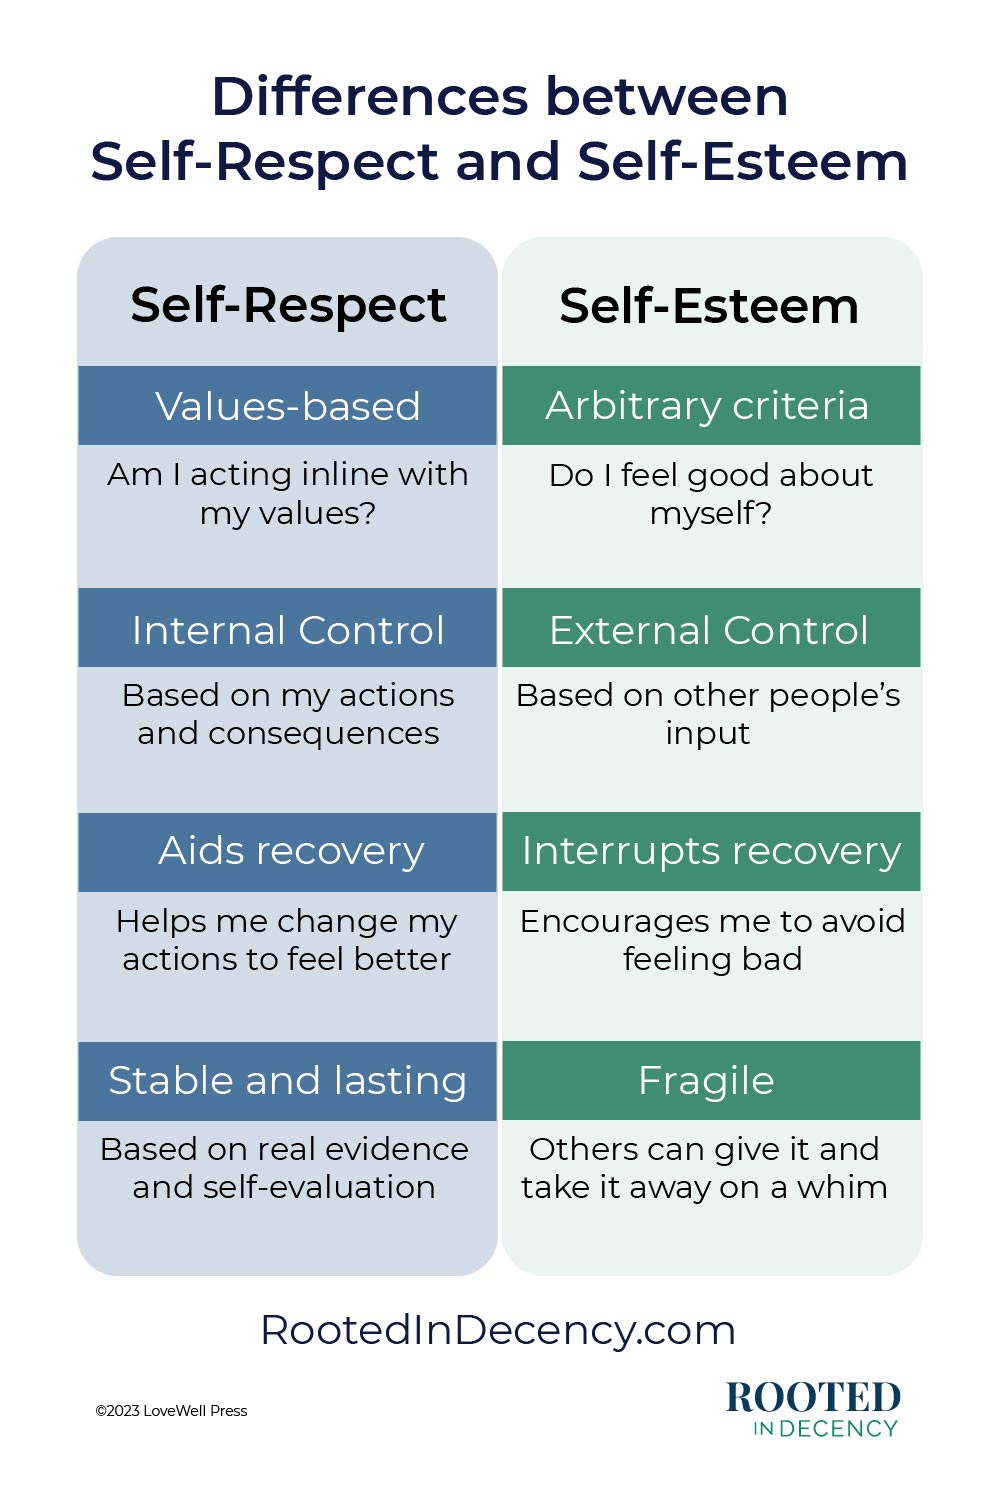 Differences between self-respect and self-esteem